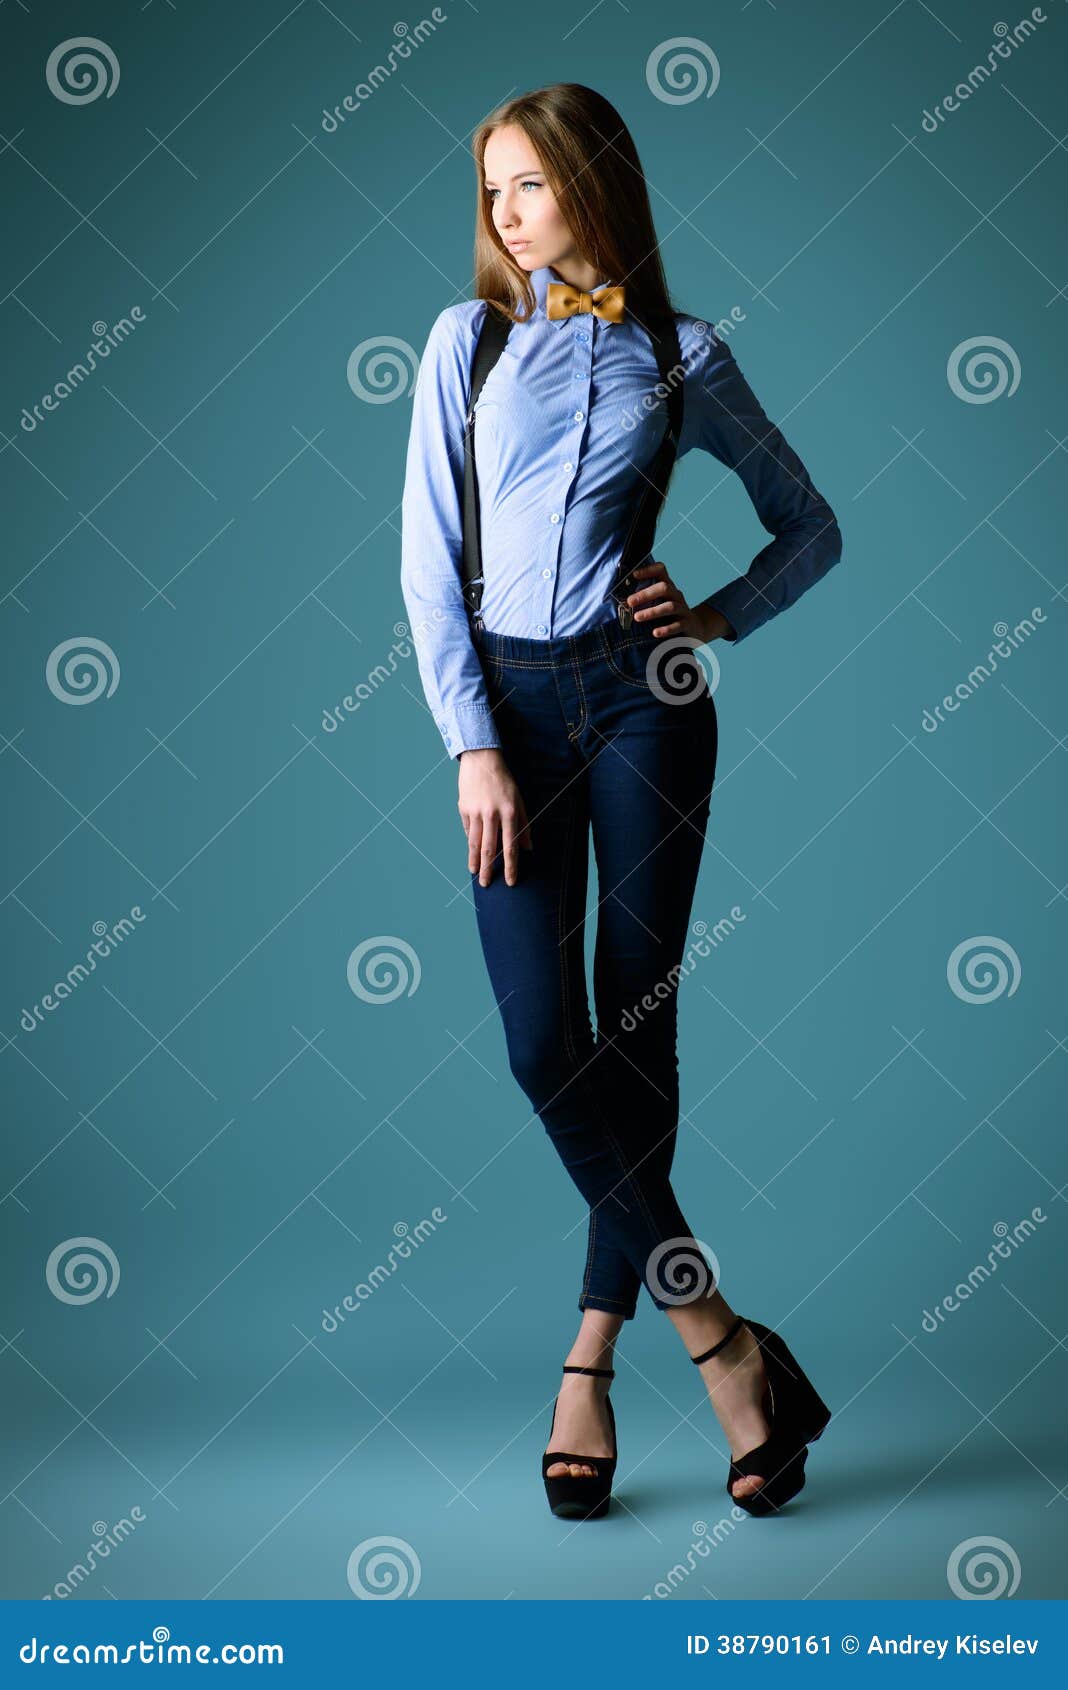 Dress Elegant Royalty-Free Images, Stock Photos & Pictures | Shutterstock